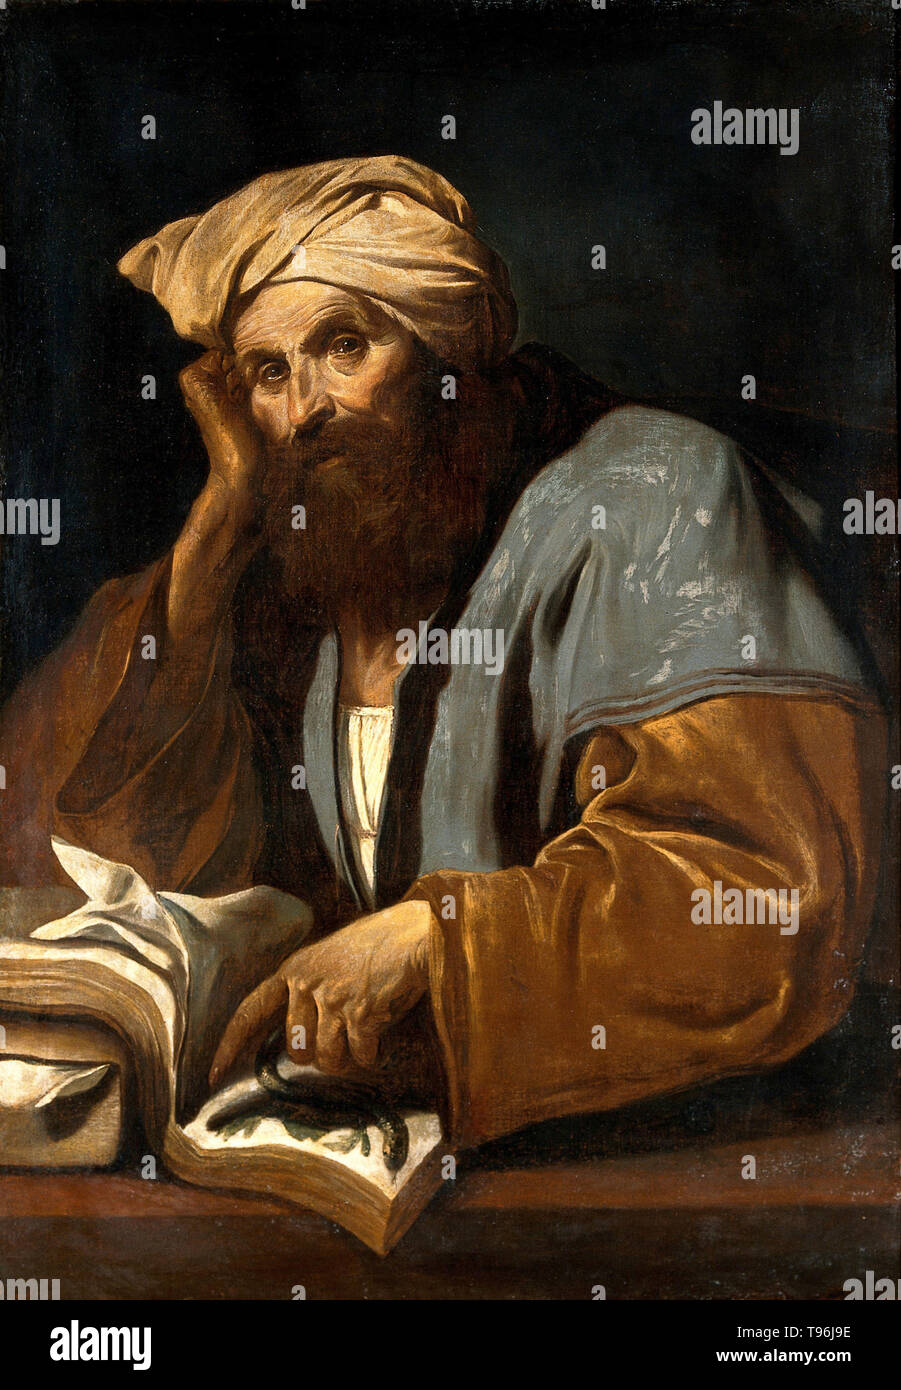 Abu 'Ali al-Husayn ibn 'Abd Allah ibn Sina (980-1037), commonly known as Ibn Sina or by his Latinized name Avicenna, was a Persian polymath, who wrote almost 450 treatises on a wide range of subjects, of which around 240 have survived. His most famous works are The Book of Healing, a vast philosophical and scientific encyclopedia, and The Canon of Medicine, which was a standard medical text at many medieval universities. Stock Photo